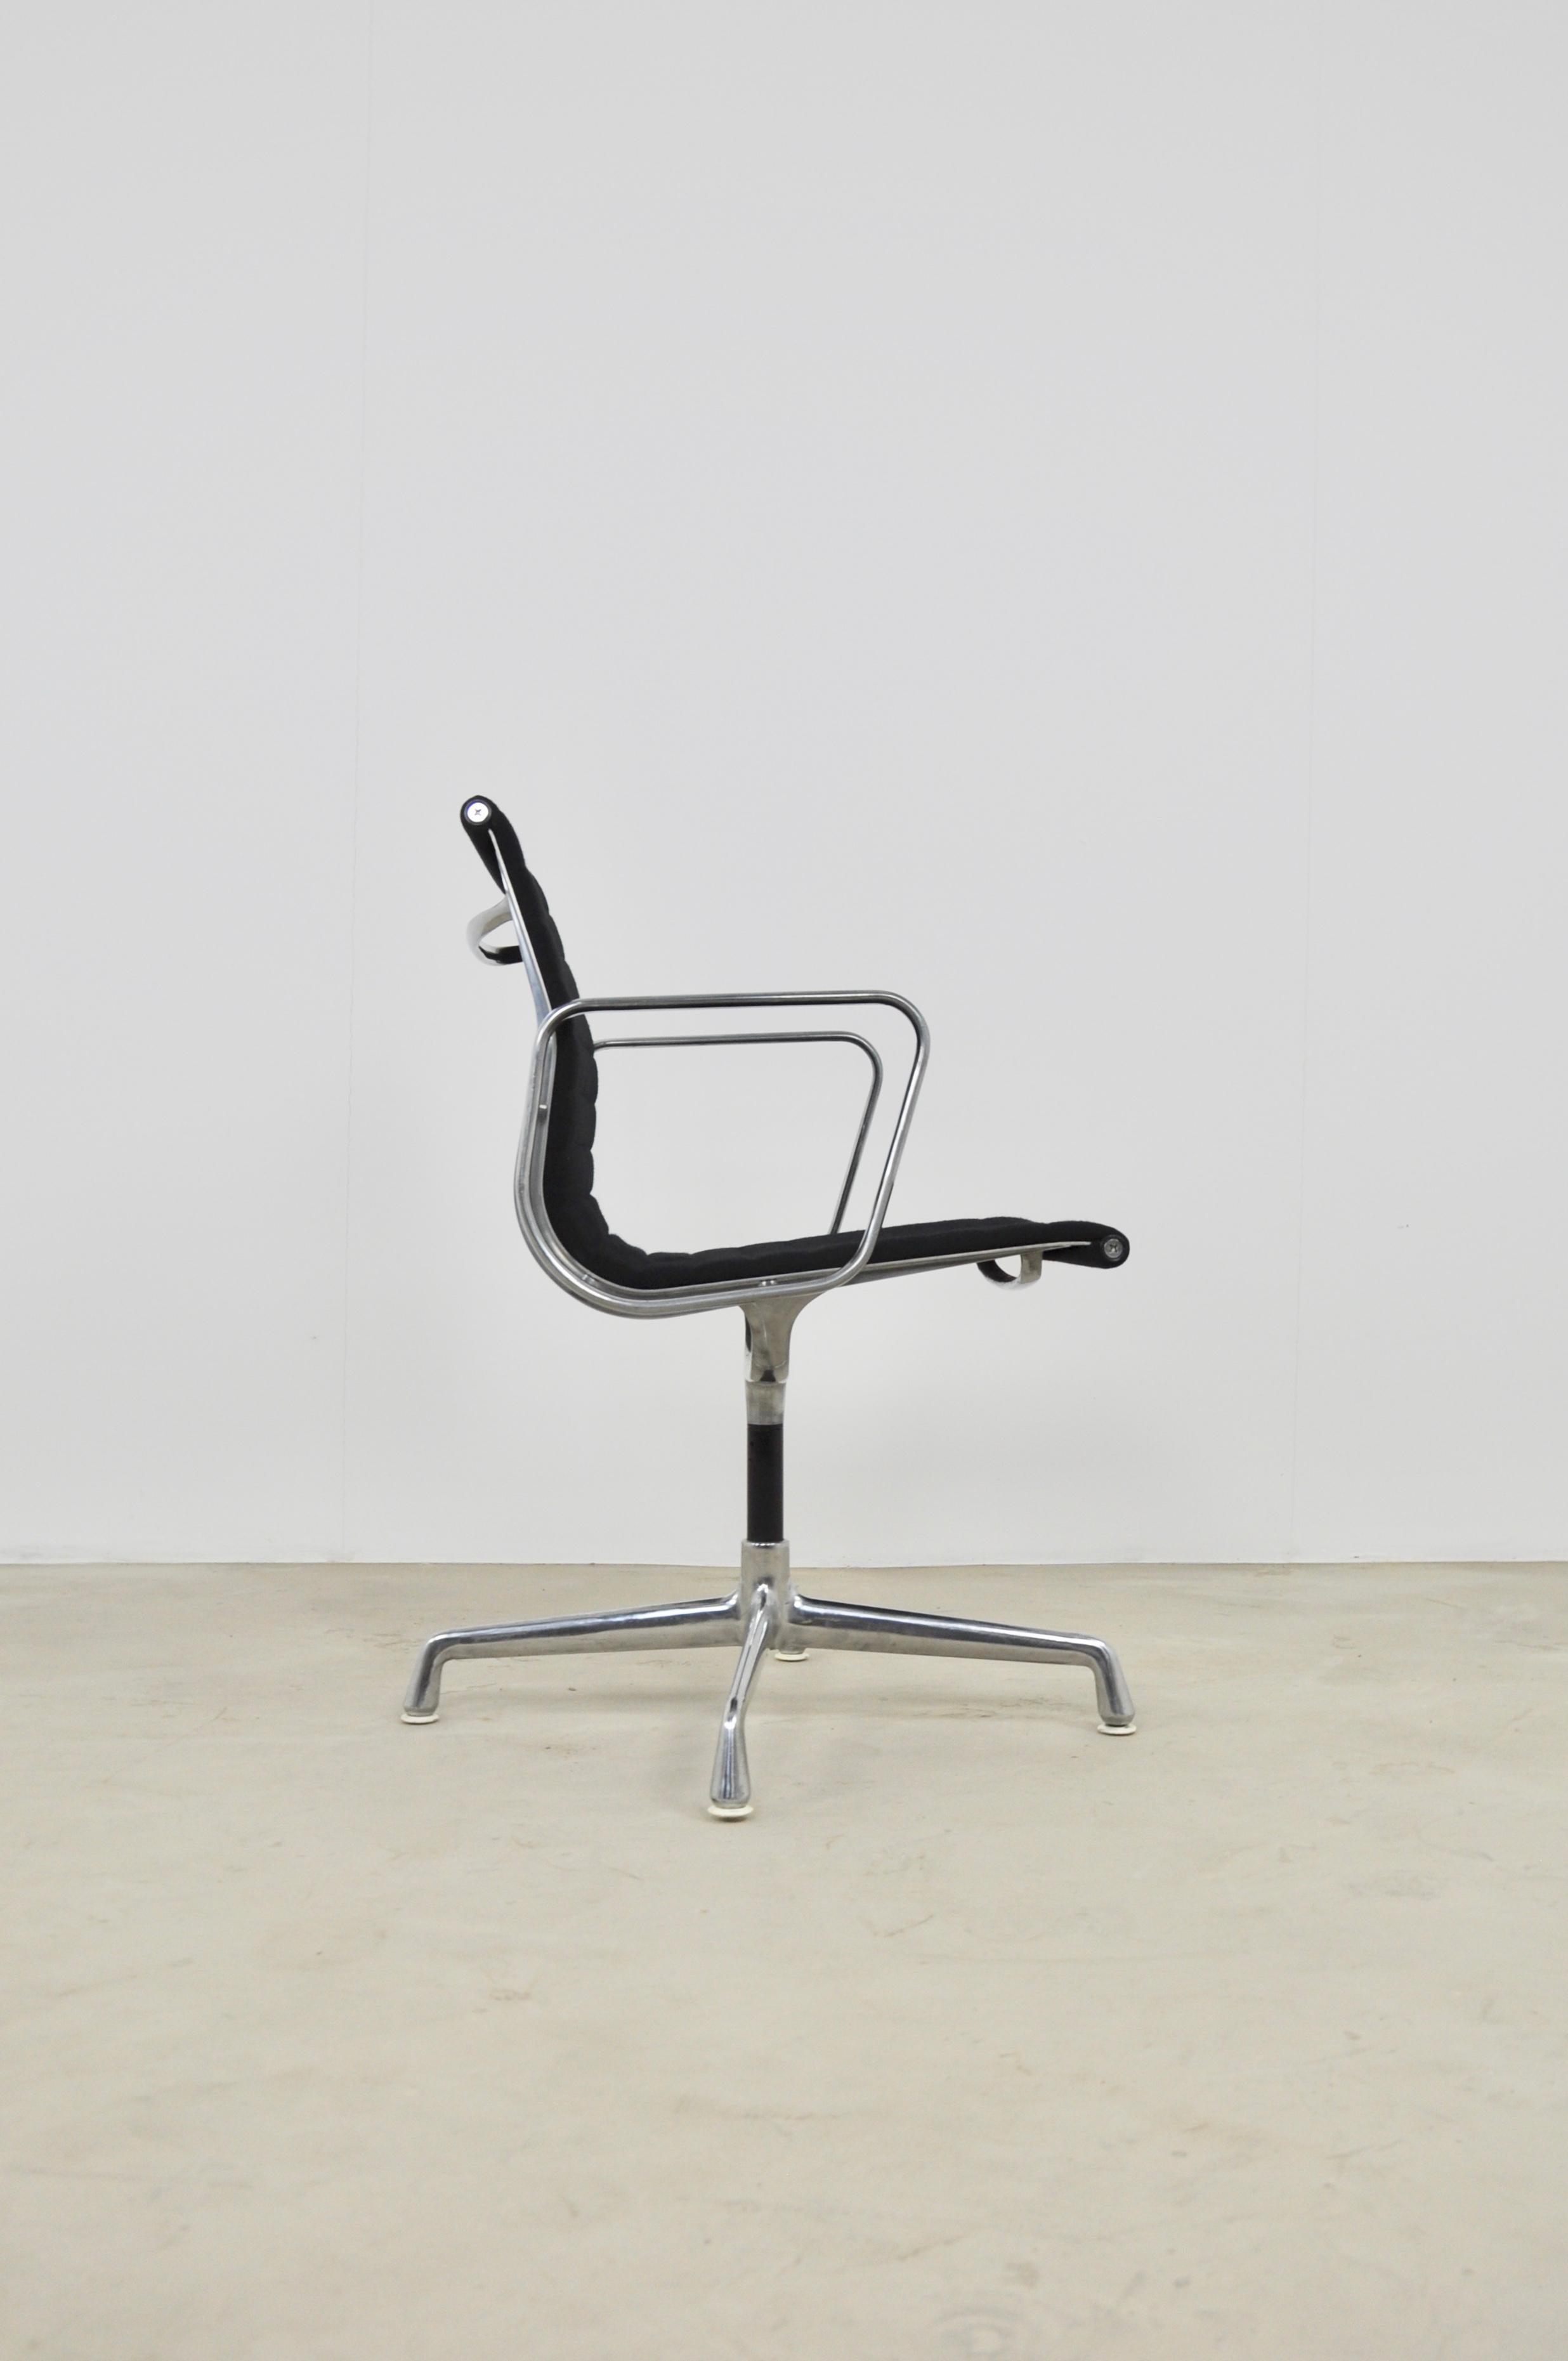 Office armchair in black fabric. Wear and tear due to time and age of the object.
Measure: Seat height 48cm.